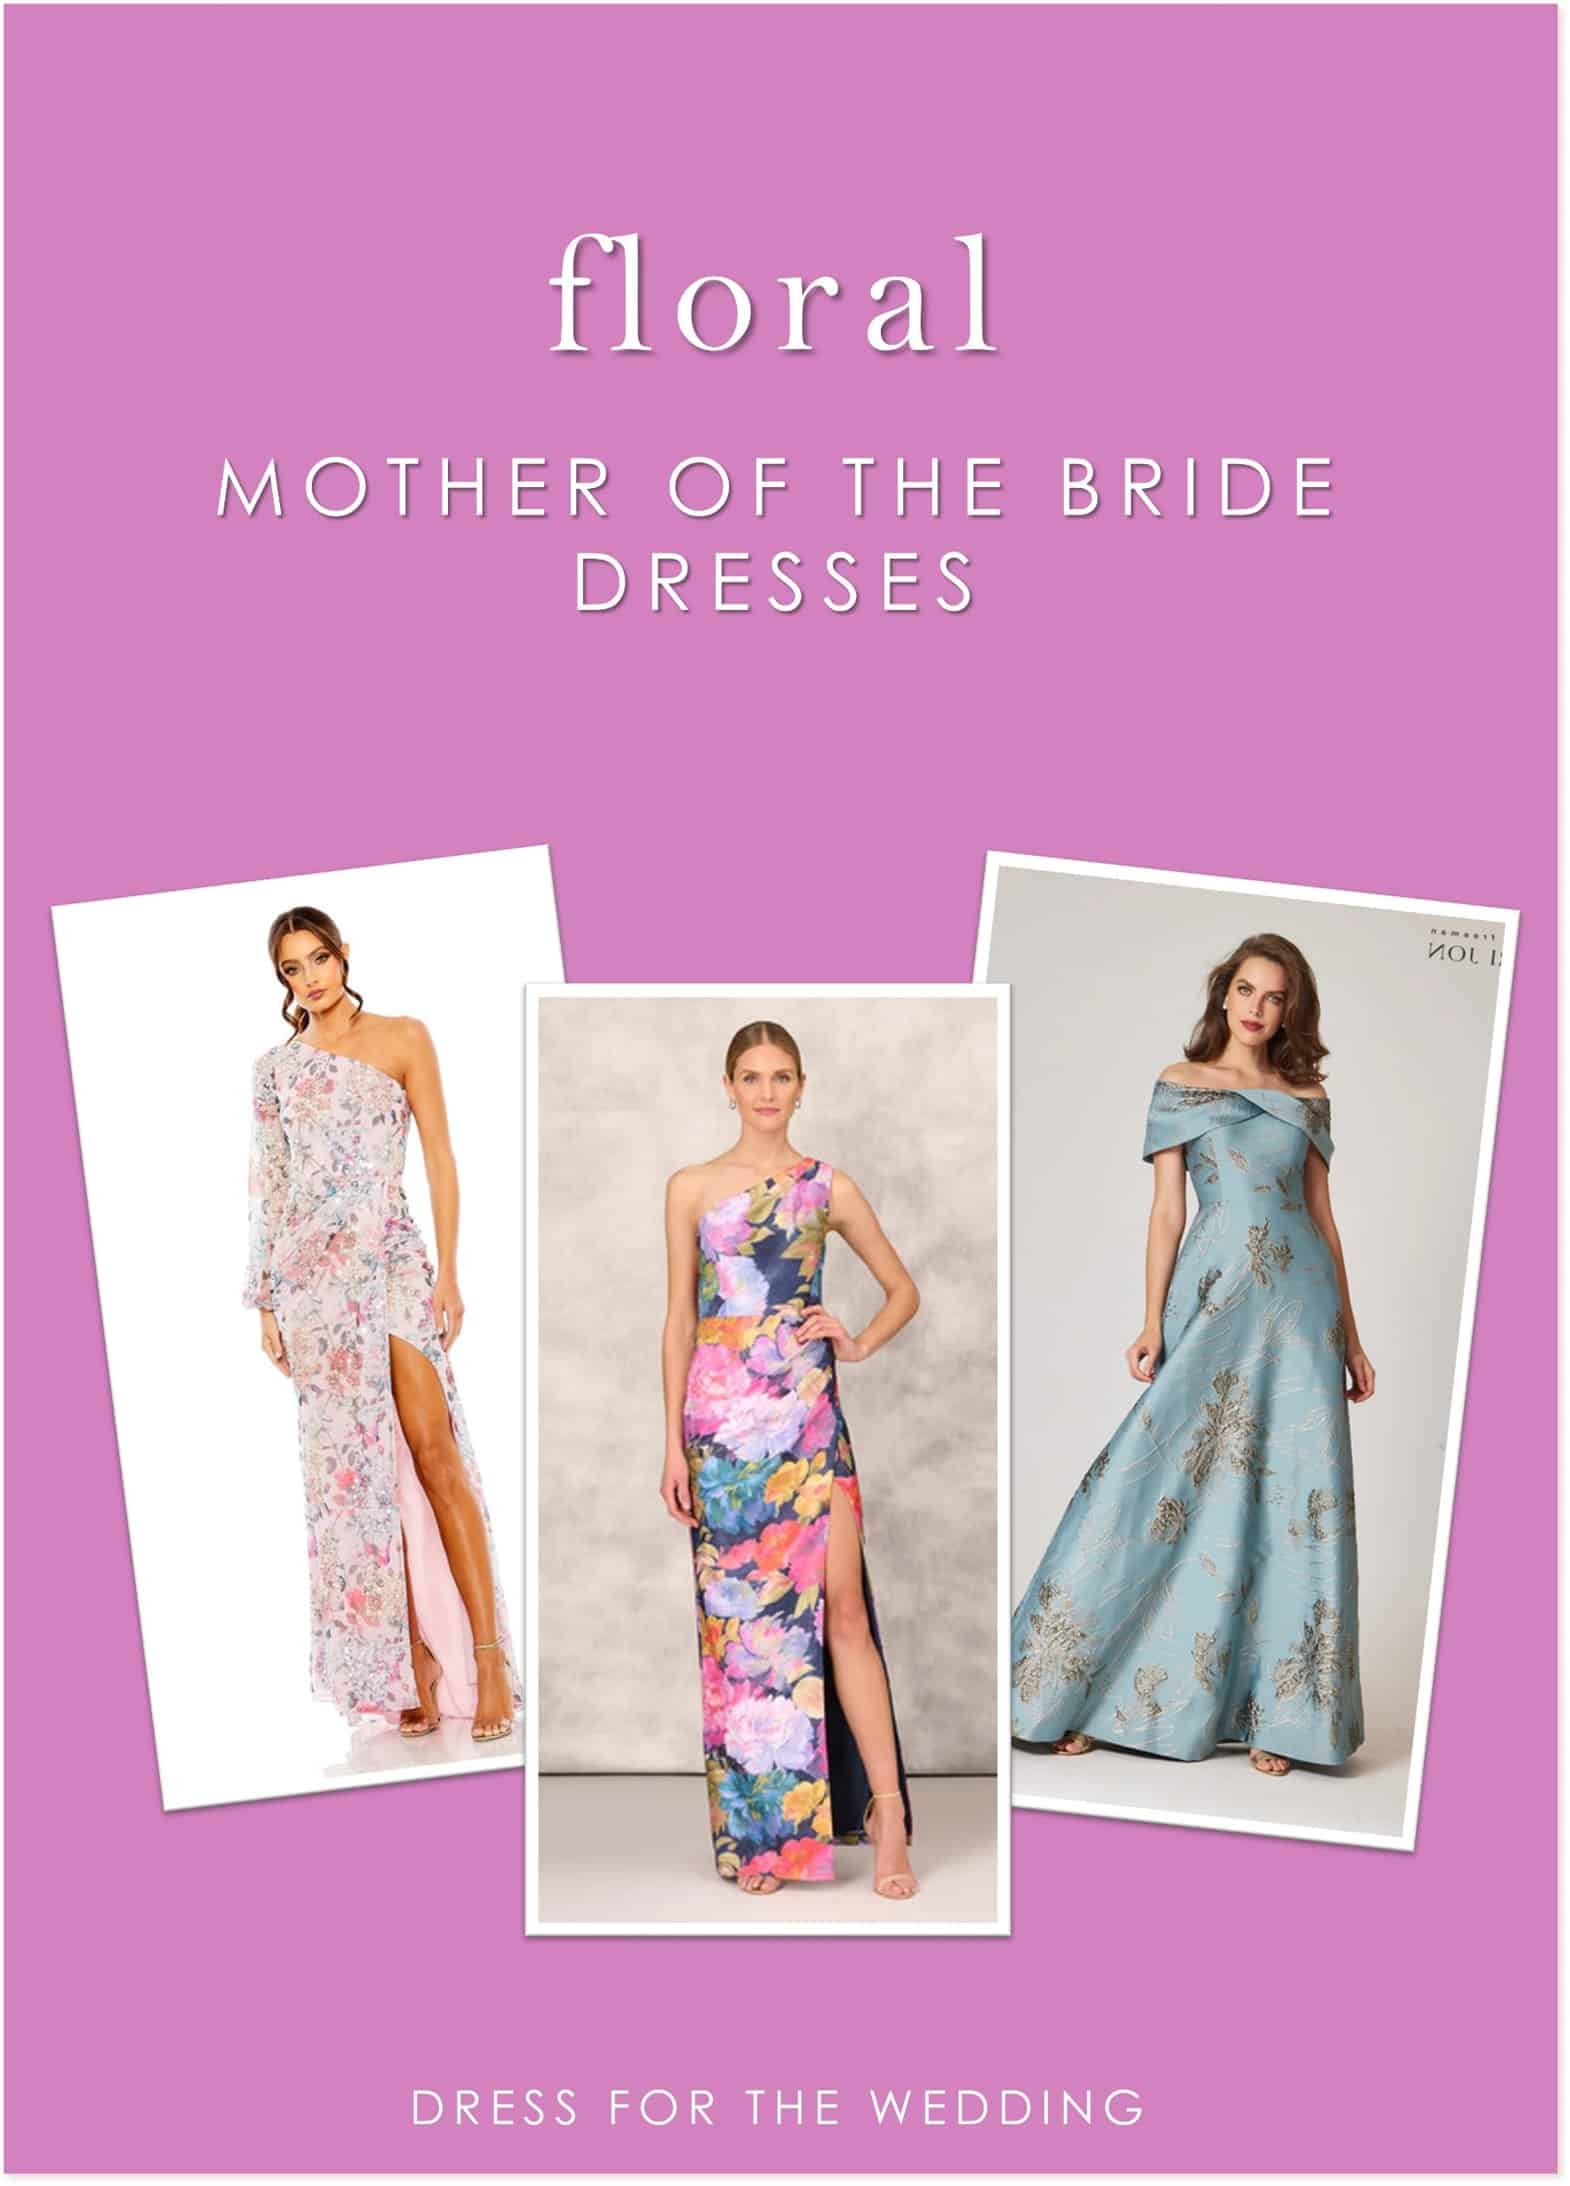 Floral Mother of the Bride Dresses - Dress for the Wedding